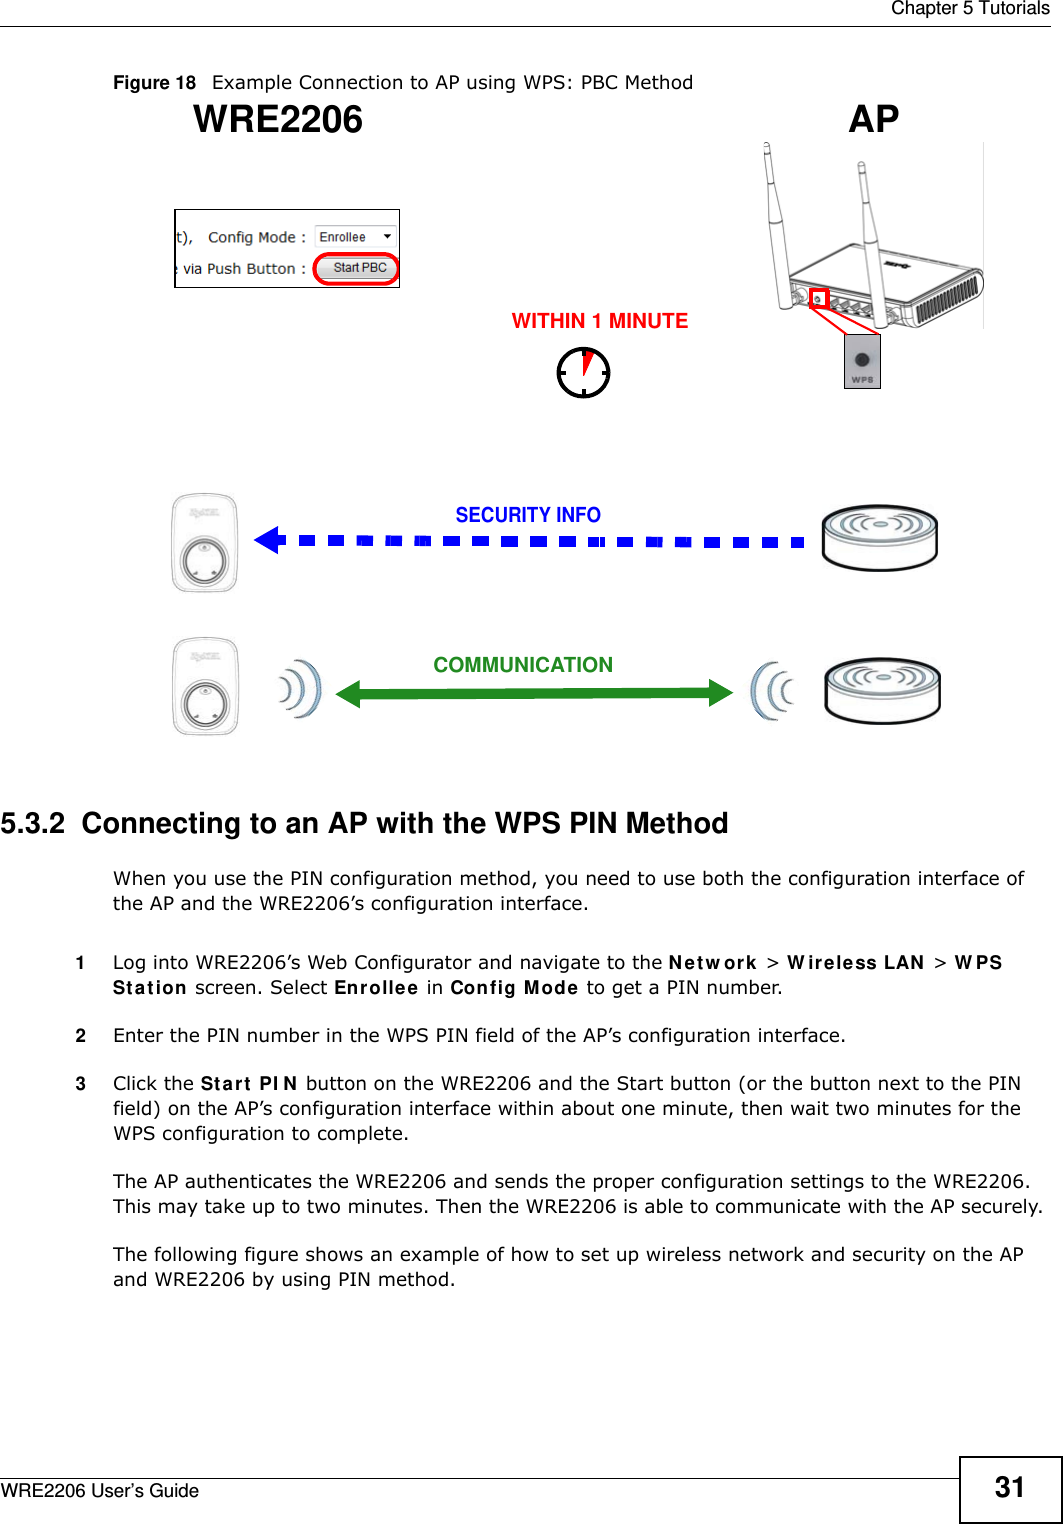  Chapter 5 TutorialsWRE2206 User’s Guide 31Figure 18   Example Connection to AP using WPS: PBC Method5.3.2  Connecting to an AP with the WPS PIN MethodWhen you use the PIN configuration method, you need to use both the configuration interface of the AP and the WRE2206’s configuration interface.1Log into WRE2206’s Web Configurator and navigate to the N e t w or k  &gt; W ir ele ss LAN  &gt; W PS St a t ion  screen. Select Enrolle e  in Config M ode to get a PIN number.2Enter the PIN number in the WPS PIN field of the AP’s configuration interface.3Click the St a rt  PI N  button on the WRE2206 and the Start button (or the button next to the PIN field) on the AP’s configuration interface within about one minute, then wait two minutes for the WPS configuration to complete.The AP authenticates the WRE2206 and sends the proper configuration settings to the WRE2206. This may take up to two minutes. Then the WRE2206 is able to communicate with the AP securely. The following figure shows an example of how to set up wireless network and security on the AP and WRE2206 by using PIN method. WRE2206SECURITY INFOCOMMUNICATIONWITHIN 1 MINUTEAP